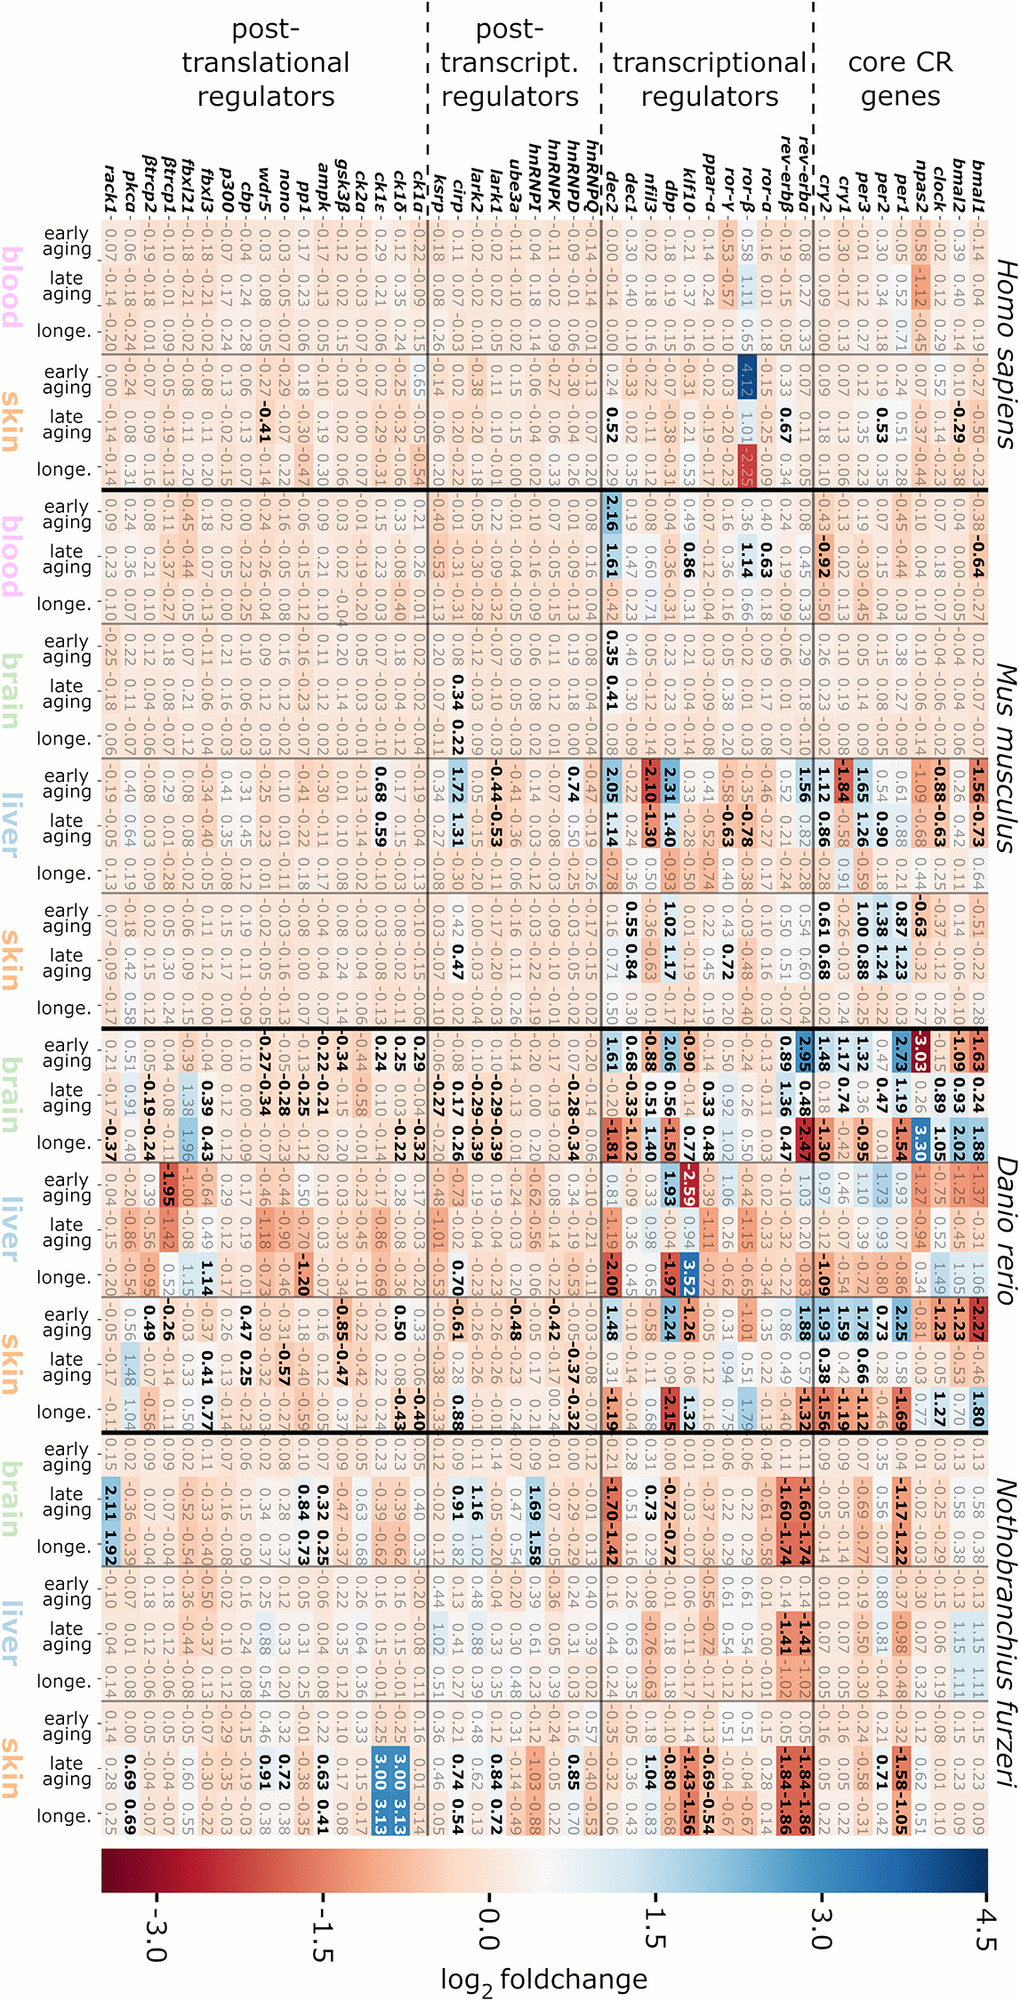 Heatmap representing log2 fold changes of the CR-related genes for the species, tissues and age categories investigated. DEG up-regulations in the course of aging are indicated by positive values displayed in blue, whereas down-regulations are shown by negative values in red. Significant gene expression alterations are highlighted in bold. The abbreviation longe. stands for the longevity age comparison (aged vs. old-age samples). For details, see the online supplement https://osf.io/9c3j4/.